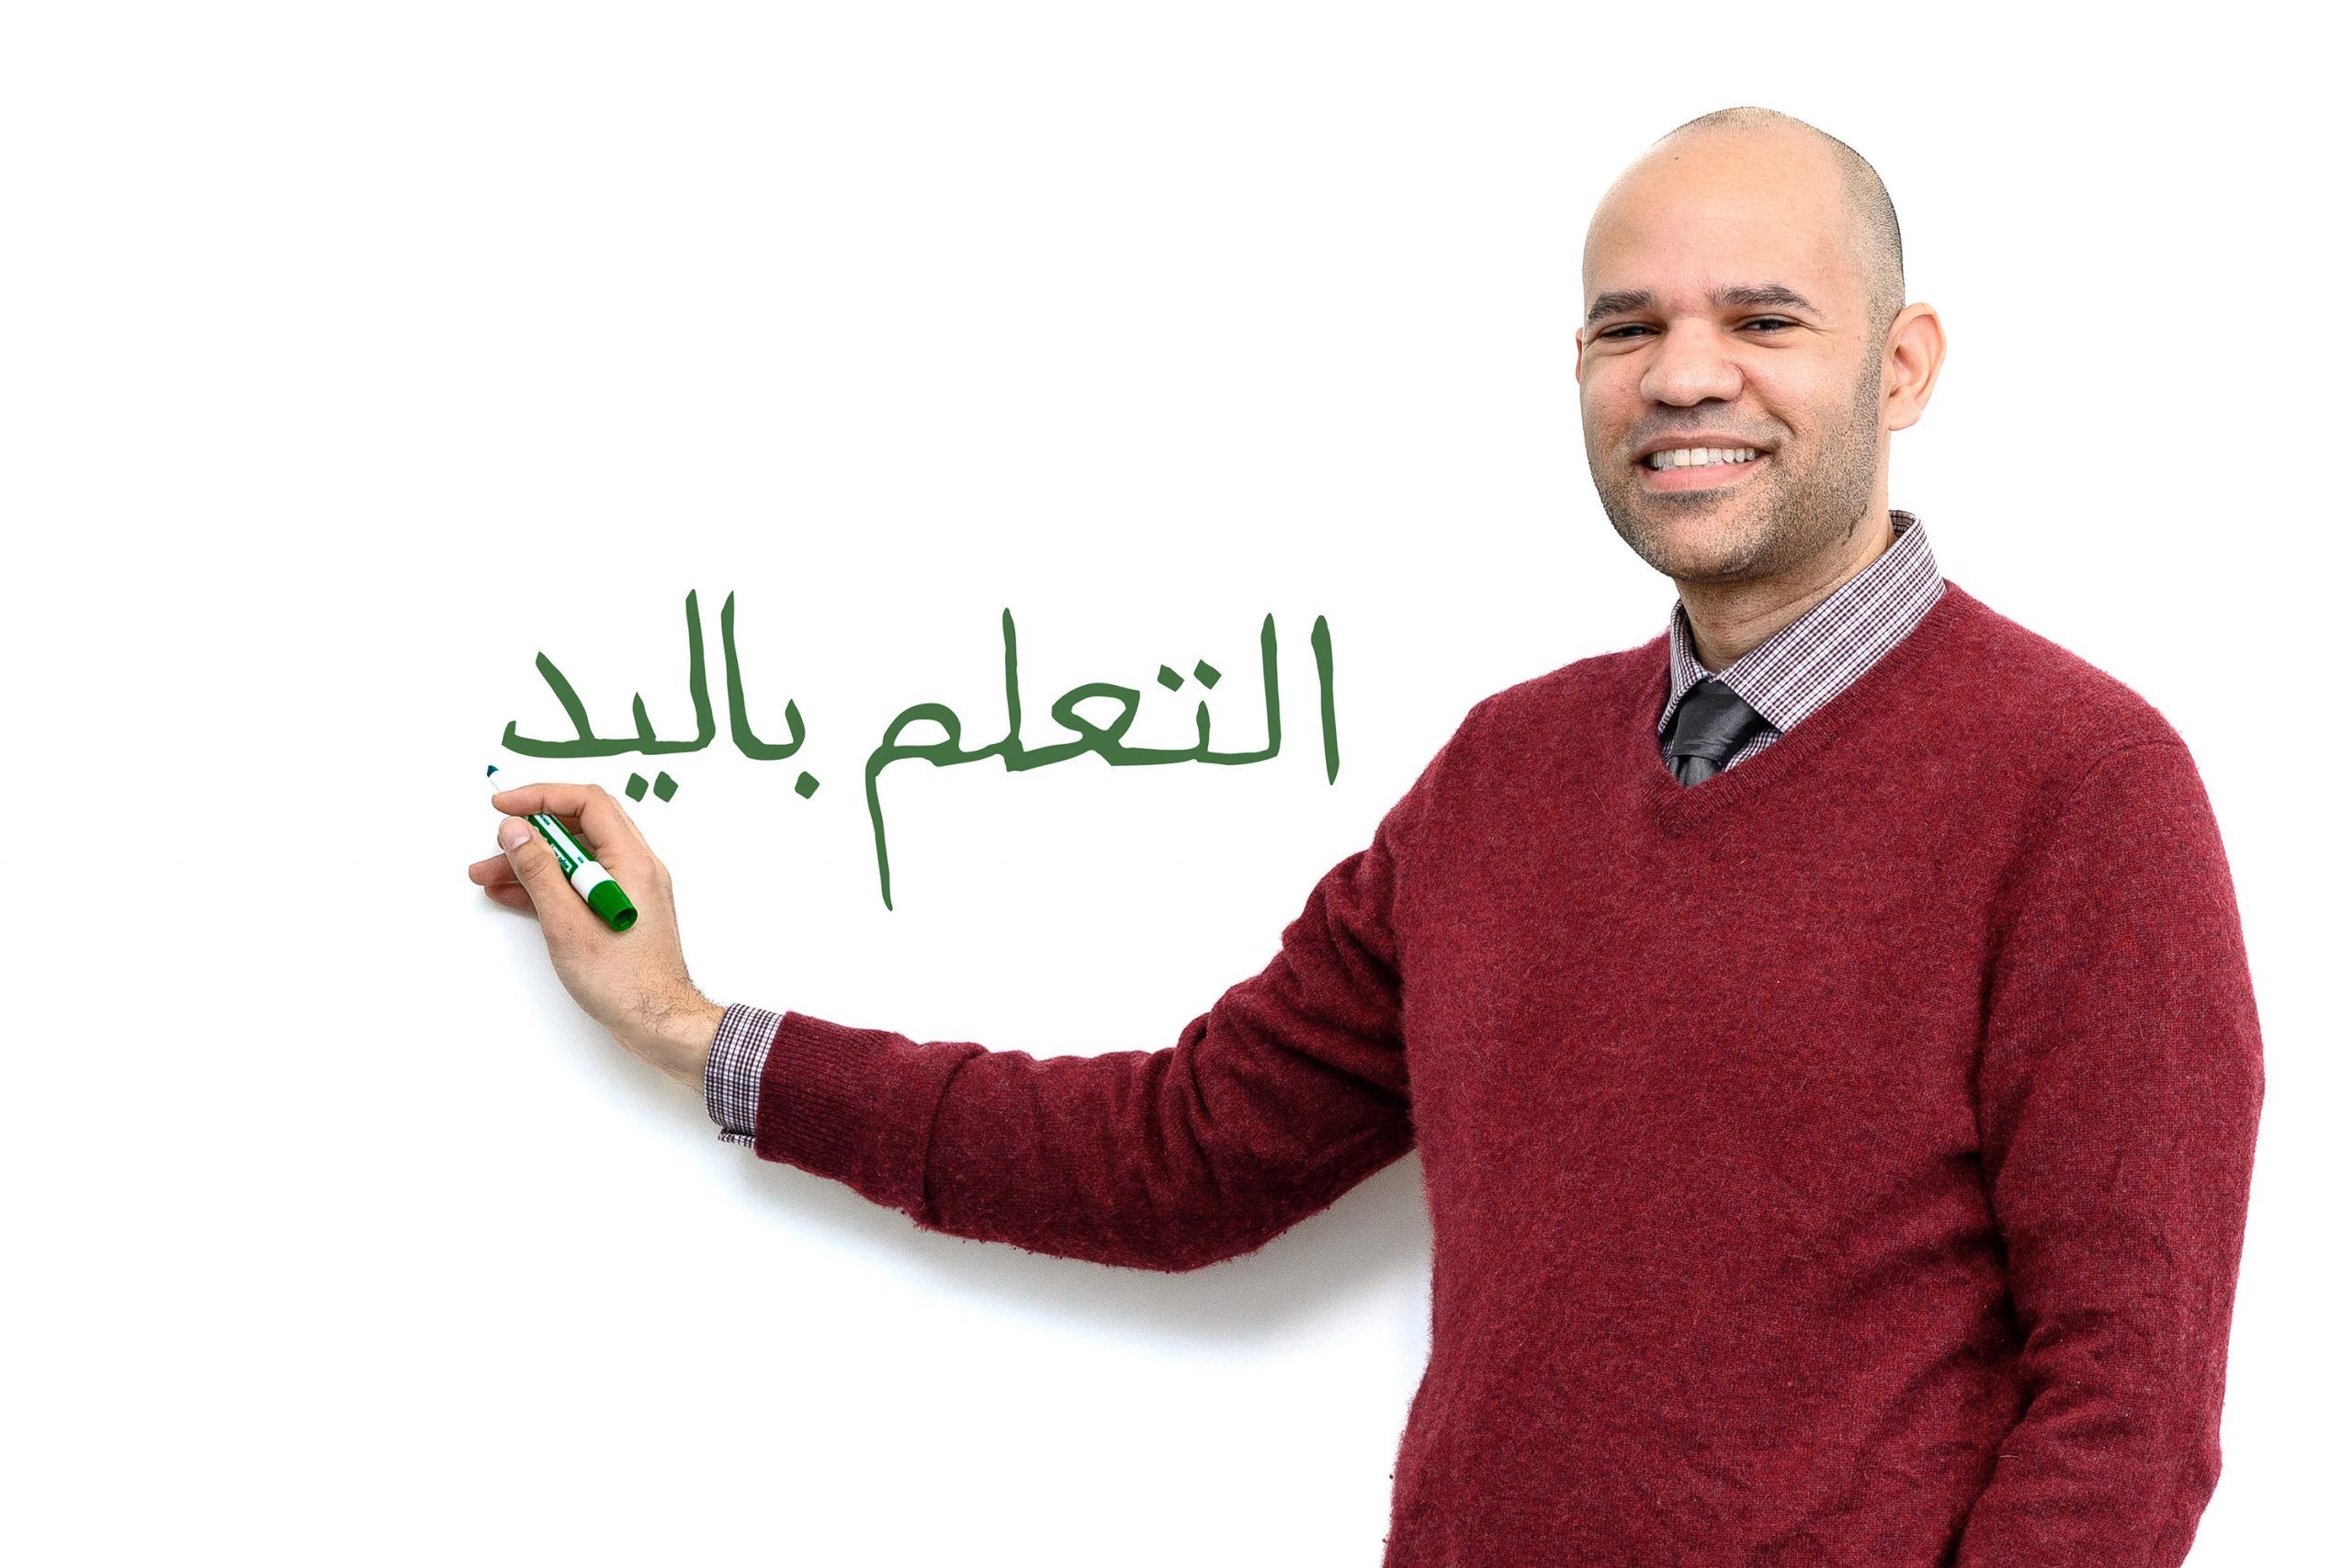 Dr. Robert Wiley demonstrates writing in Arabic on a whiteboard.